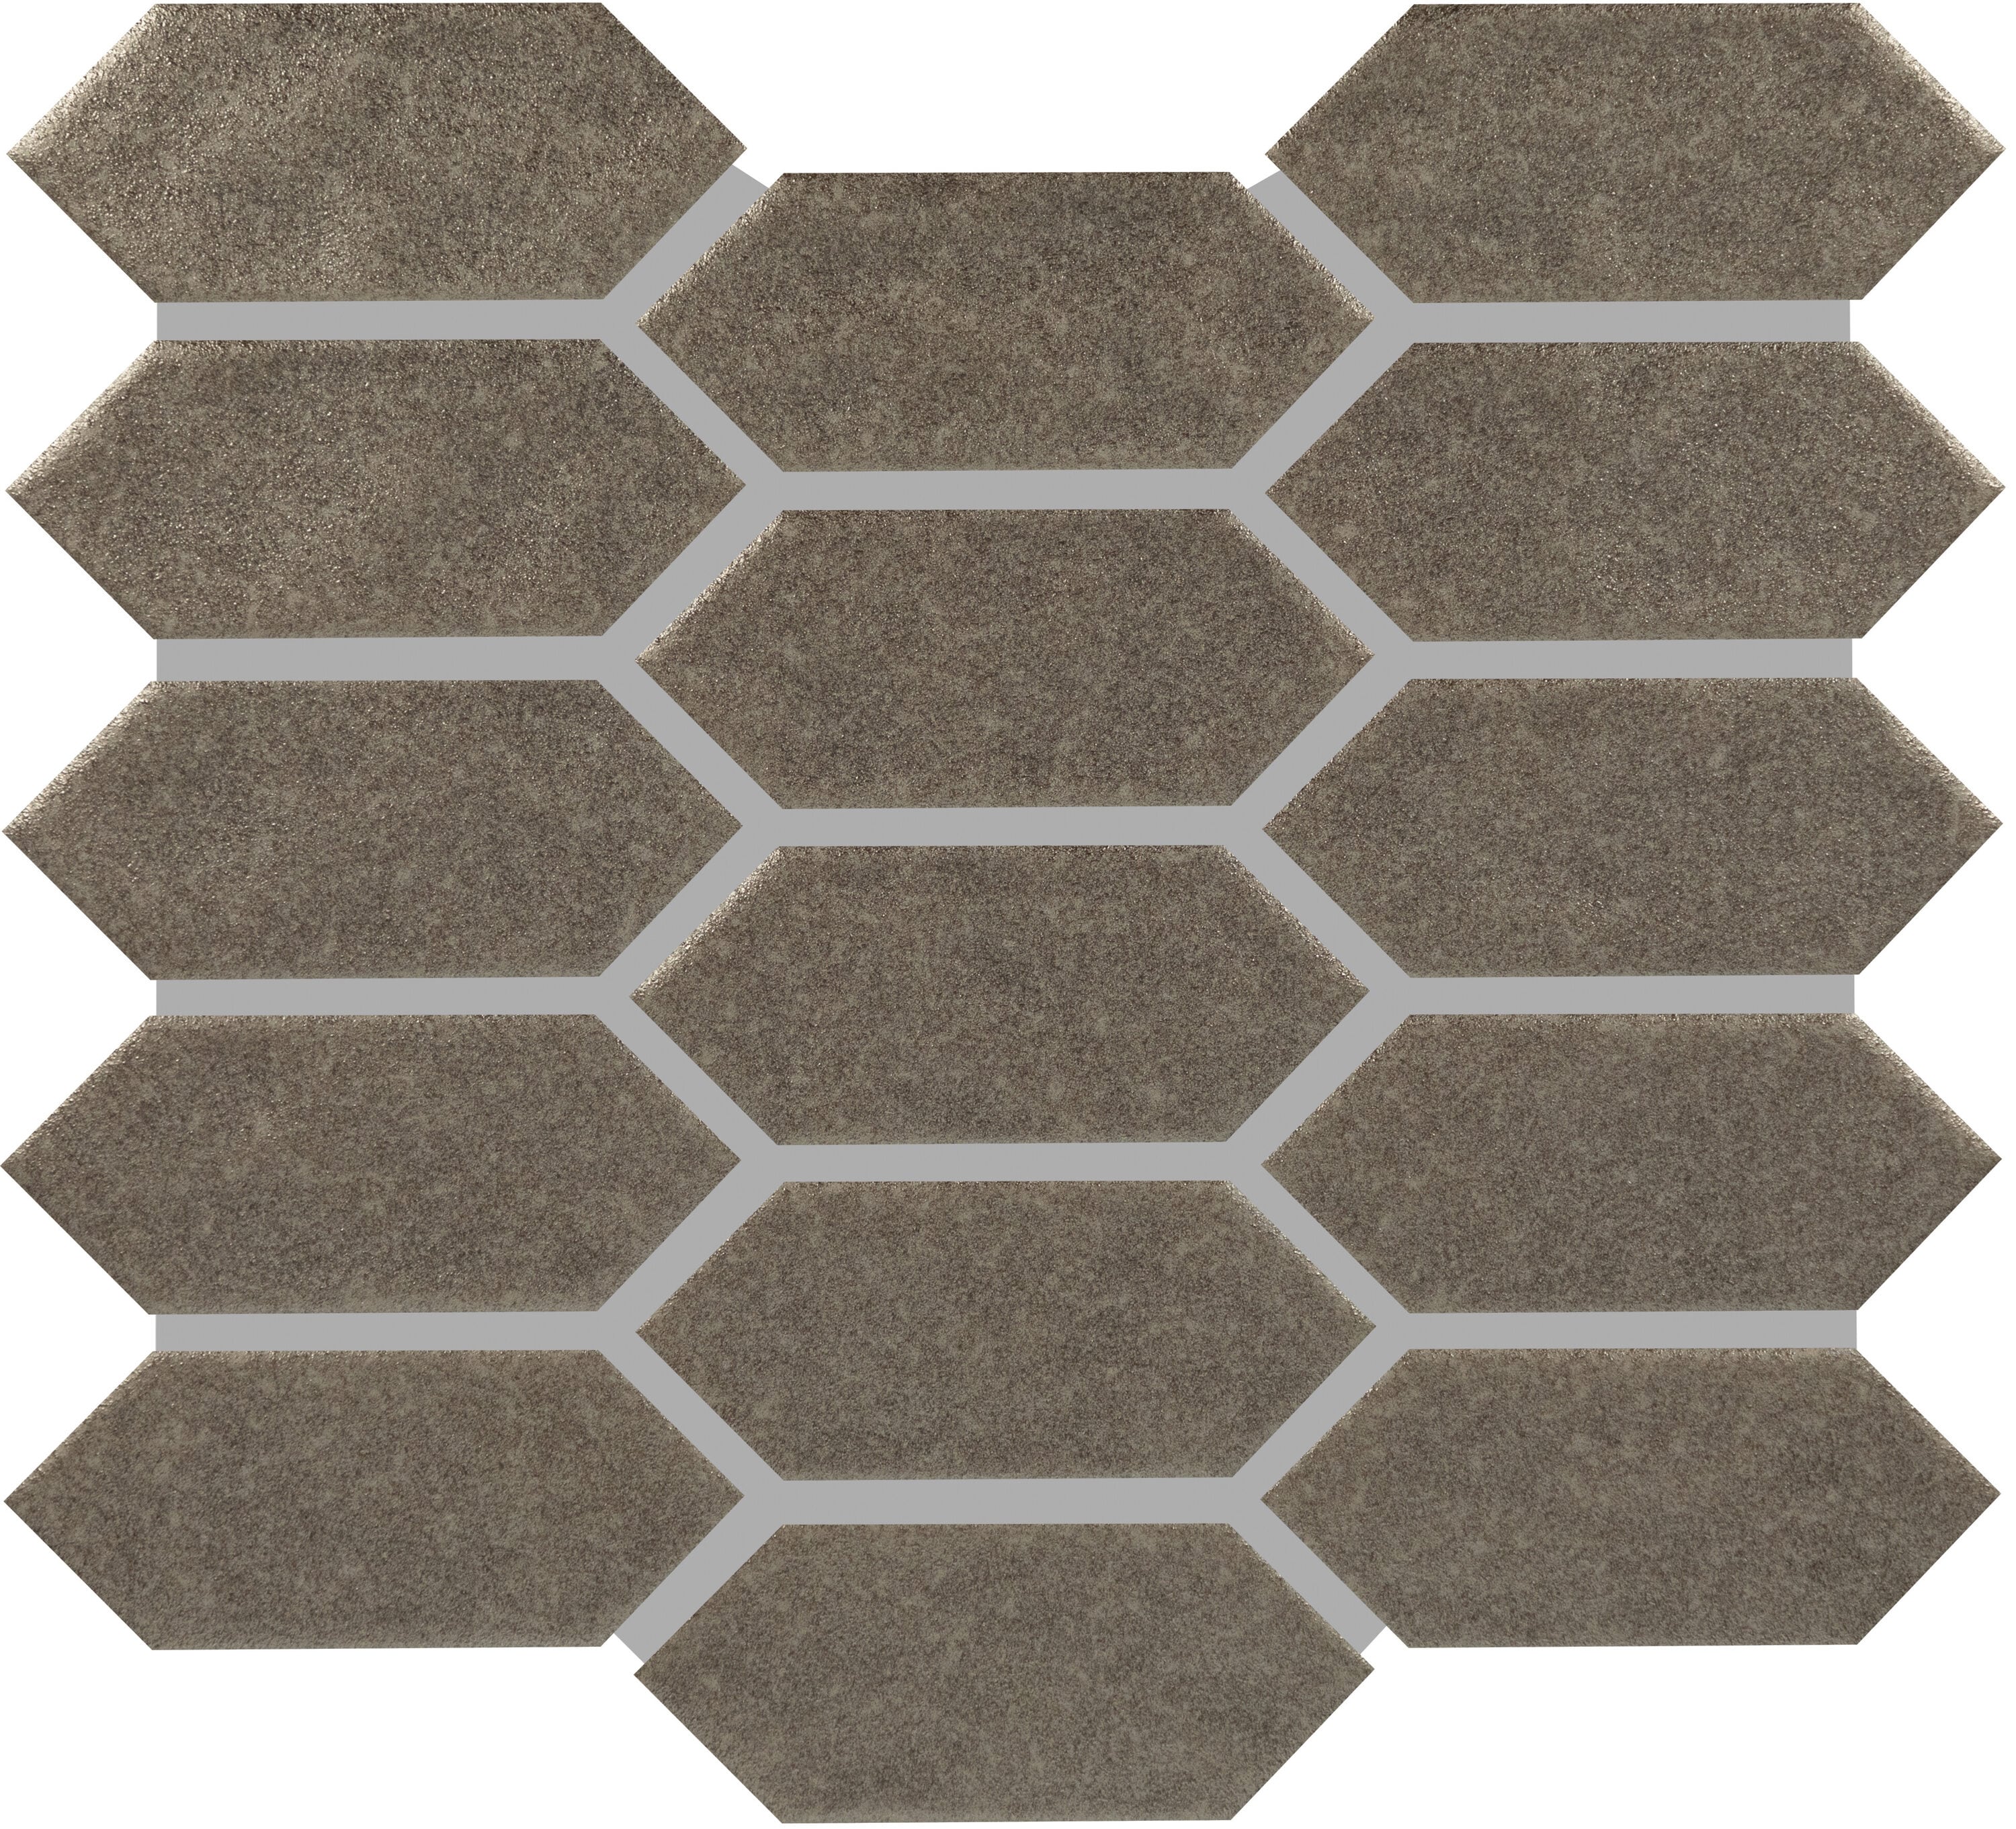 Hillcrest Ridge Metallic Vibe 11-in x 12-in Glossy Ceramic Hexagon Patterned Wall Tile (8.76-sq. ft/ Carton) | - American Olean AT2525PICKMS1P2